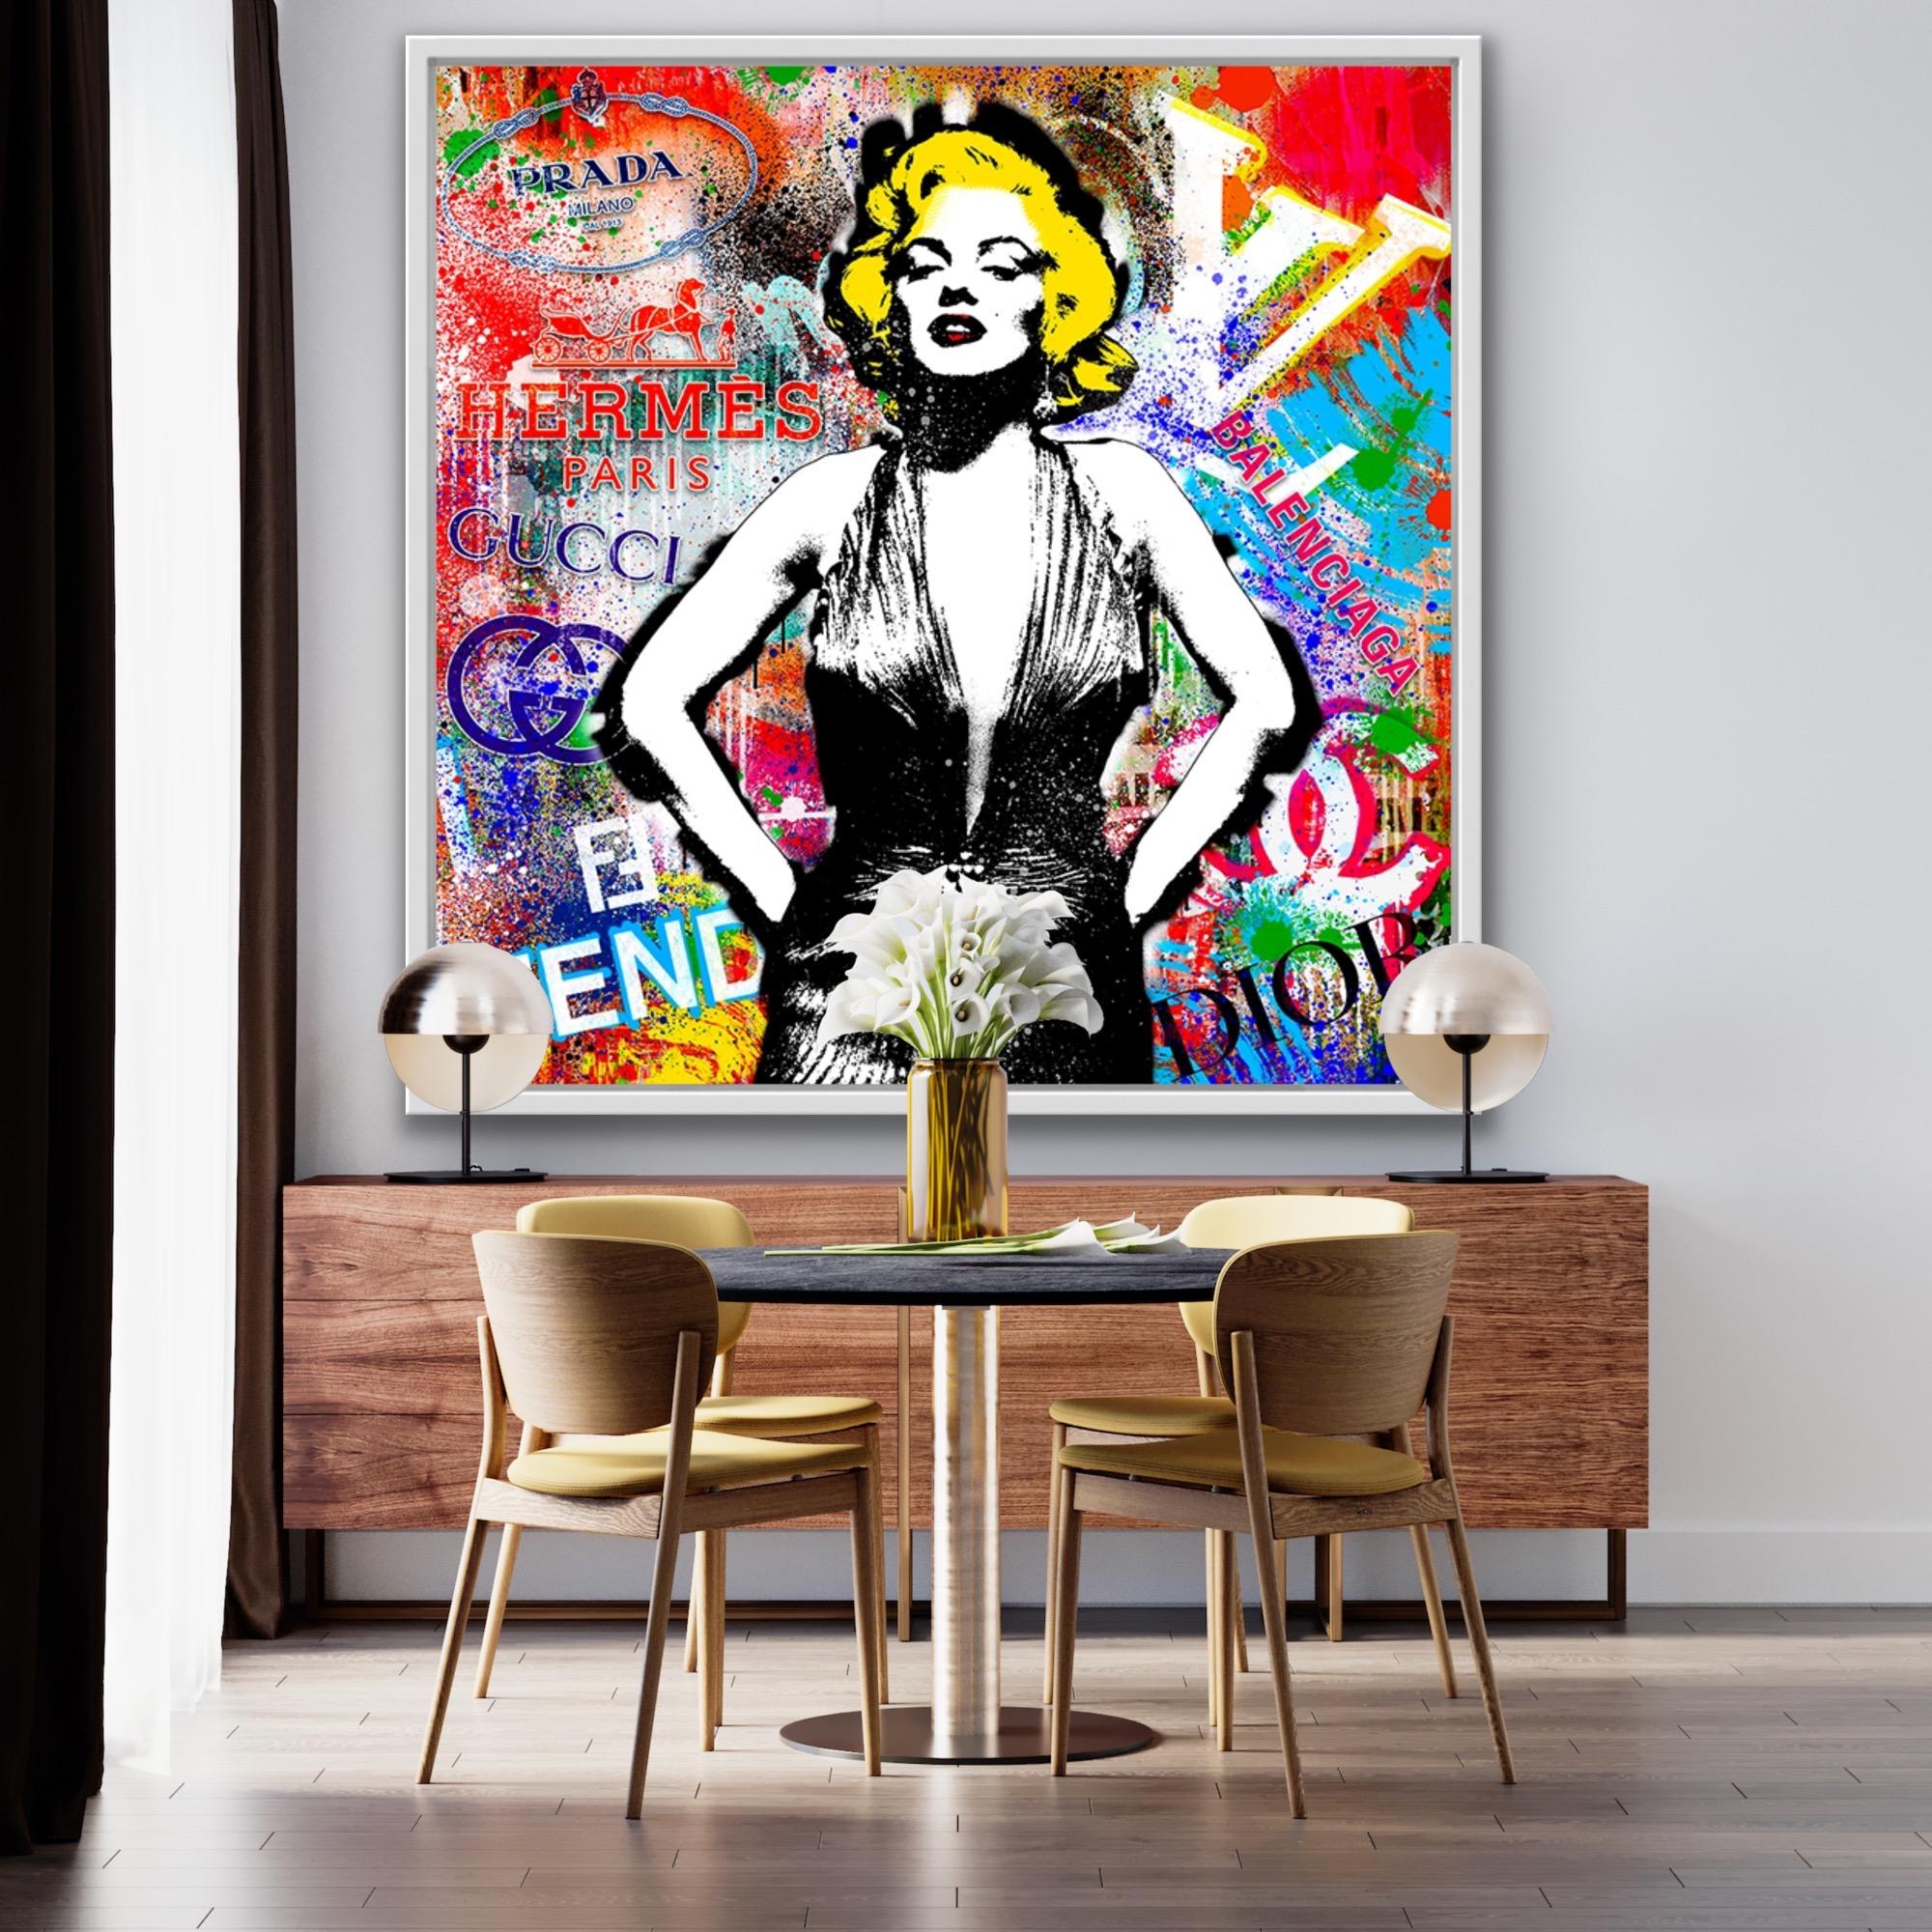 Marilyn as Vicky Debevoise, Famous Celebrity Artwork, Hollywood Art, Urban Art - Street Art Painting by Agent X